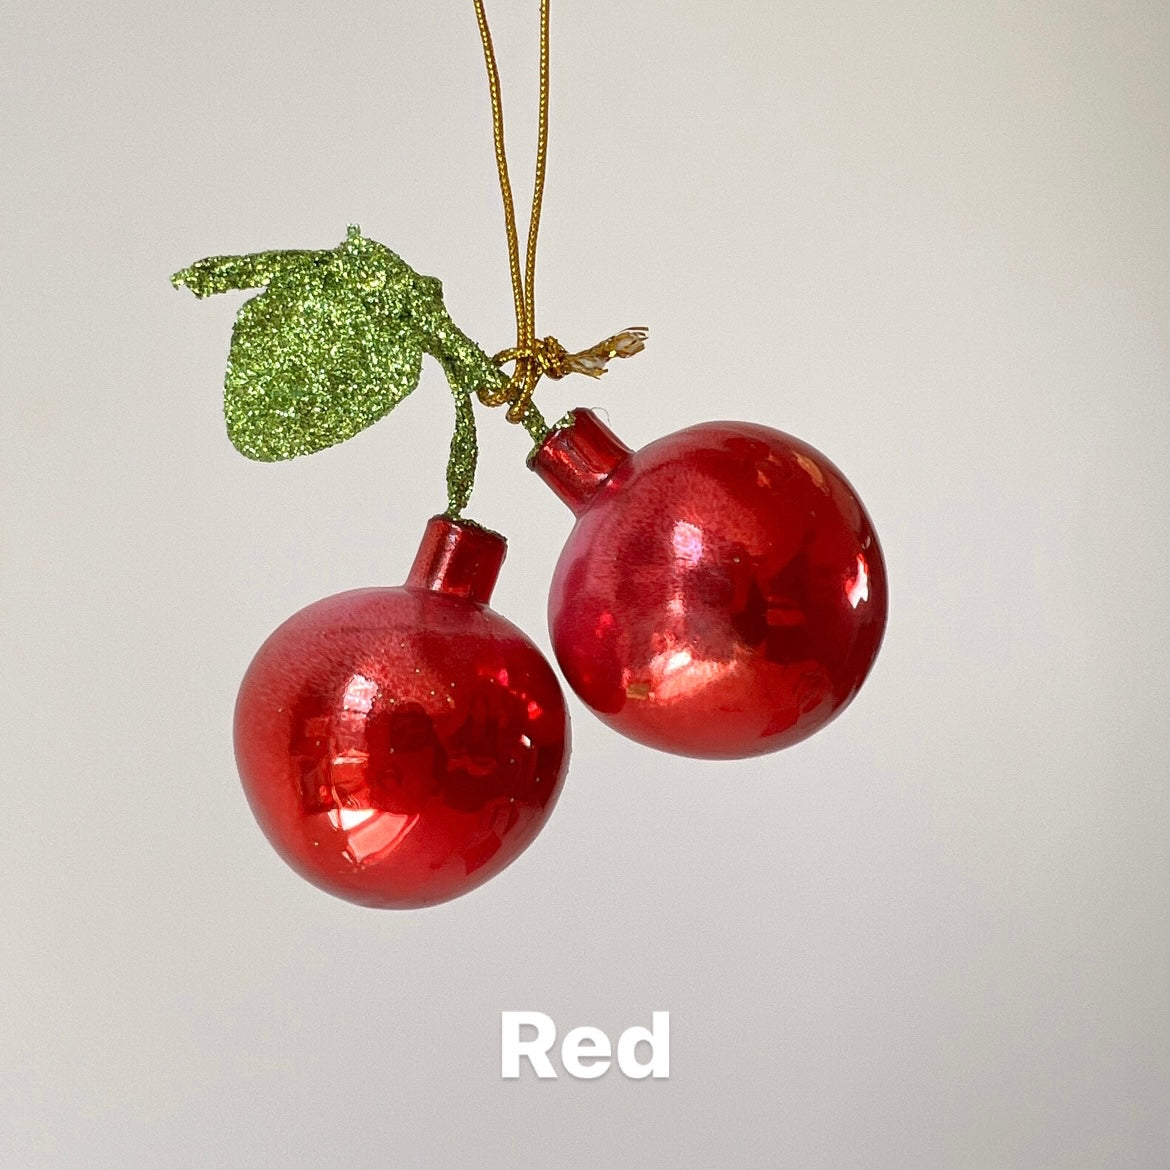 Orchard Cherries Ornament